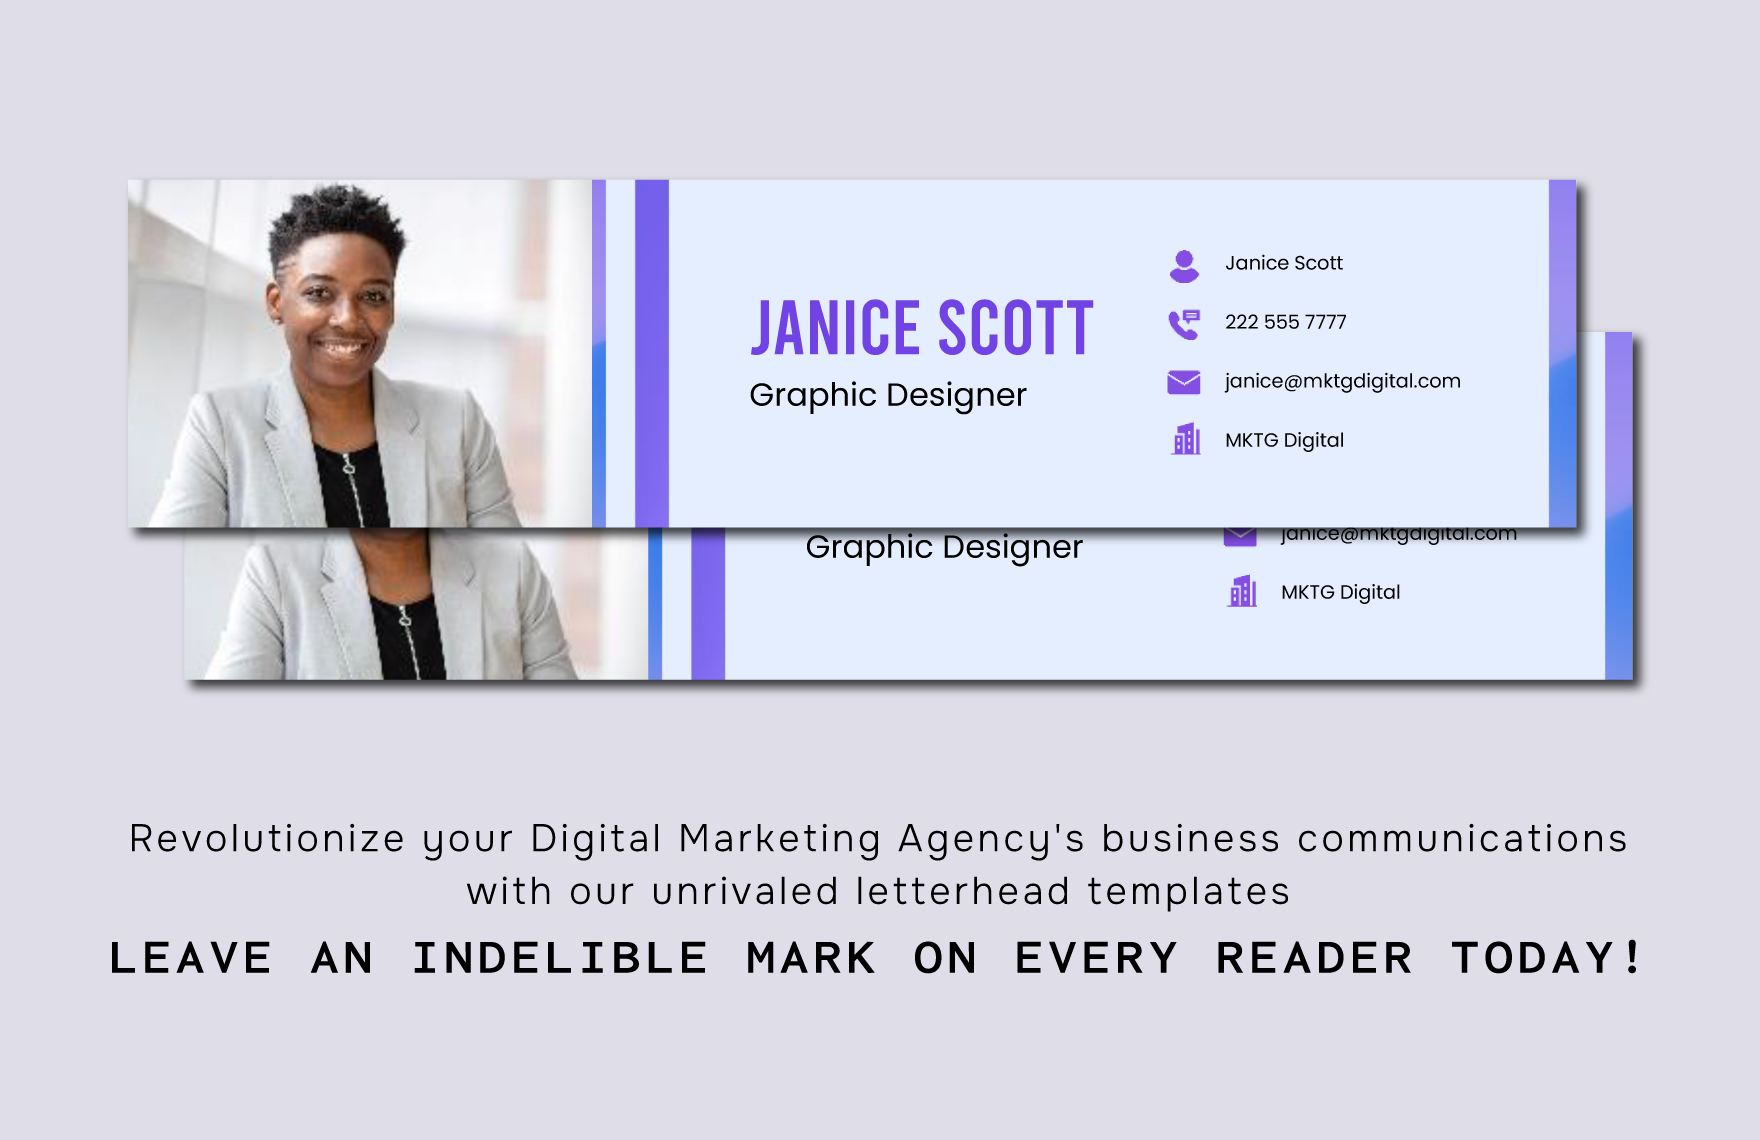 Digital Marketing Agency Image Email Signature Template